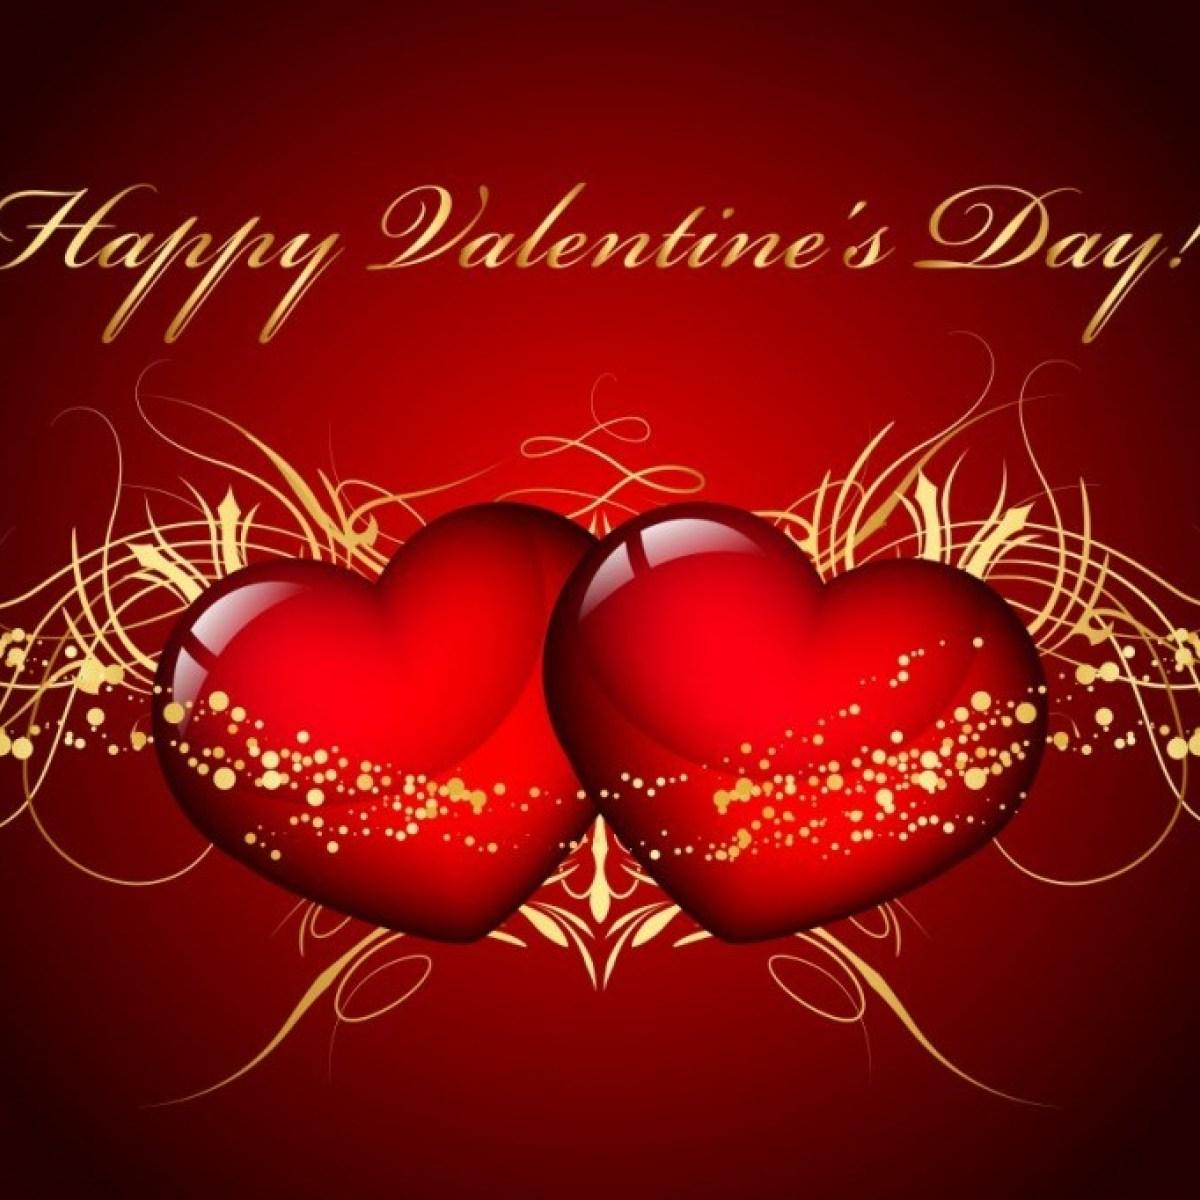 Feb Happy Valentine's Day 2019 Poems Quotes Wishes